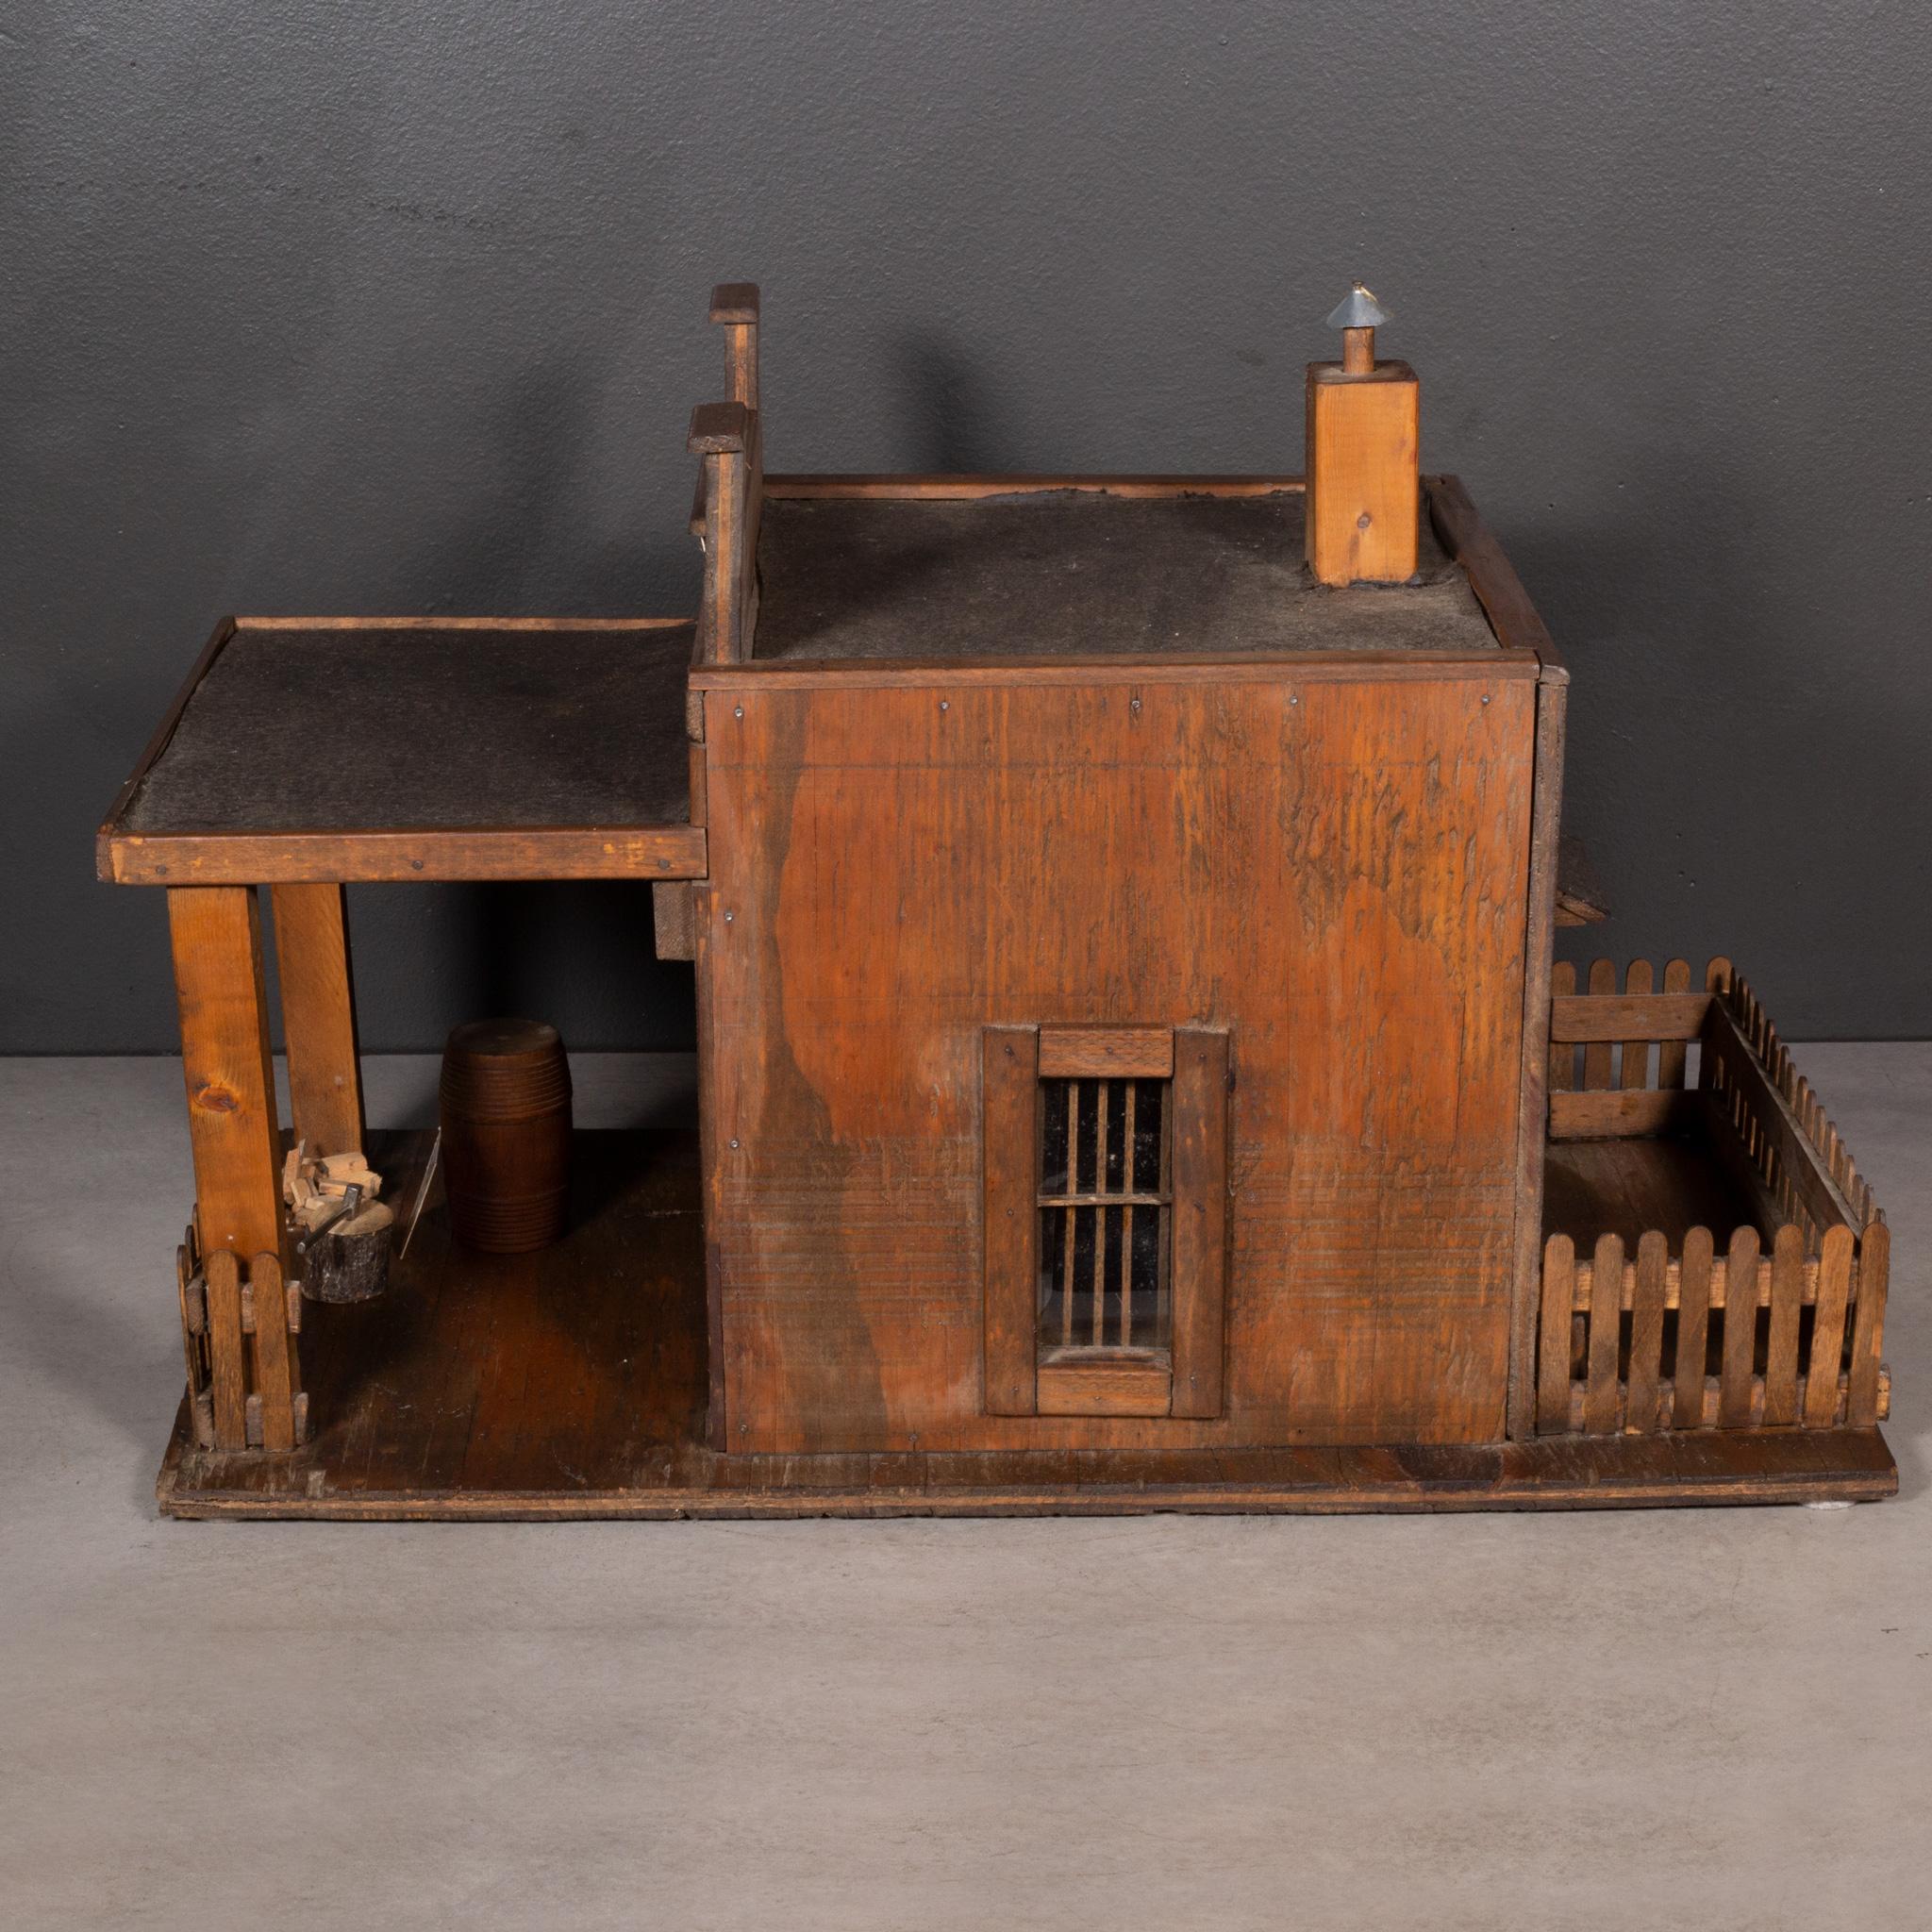 Handmade General Store Wooden Folk Art Model c.1960-1980 In Good Condition For Sale In San Francisco, CA